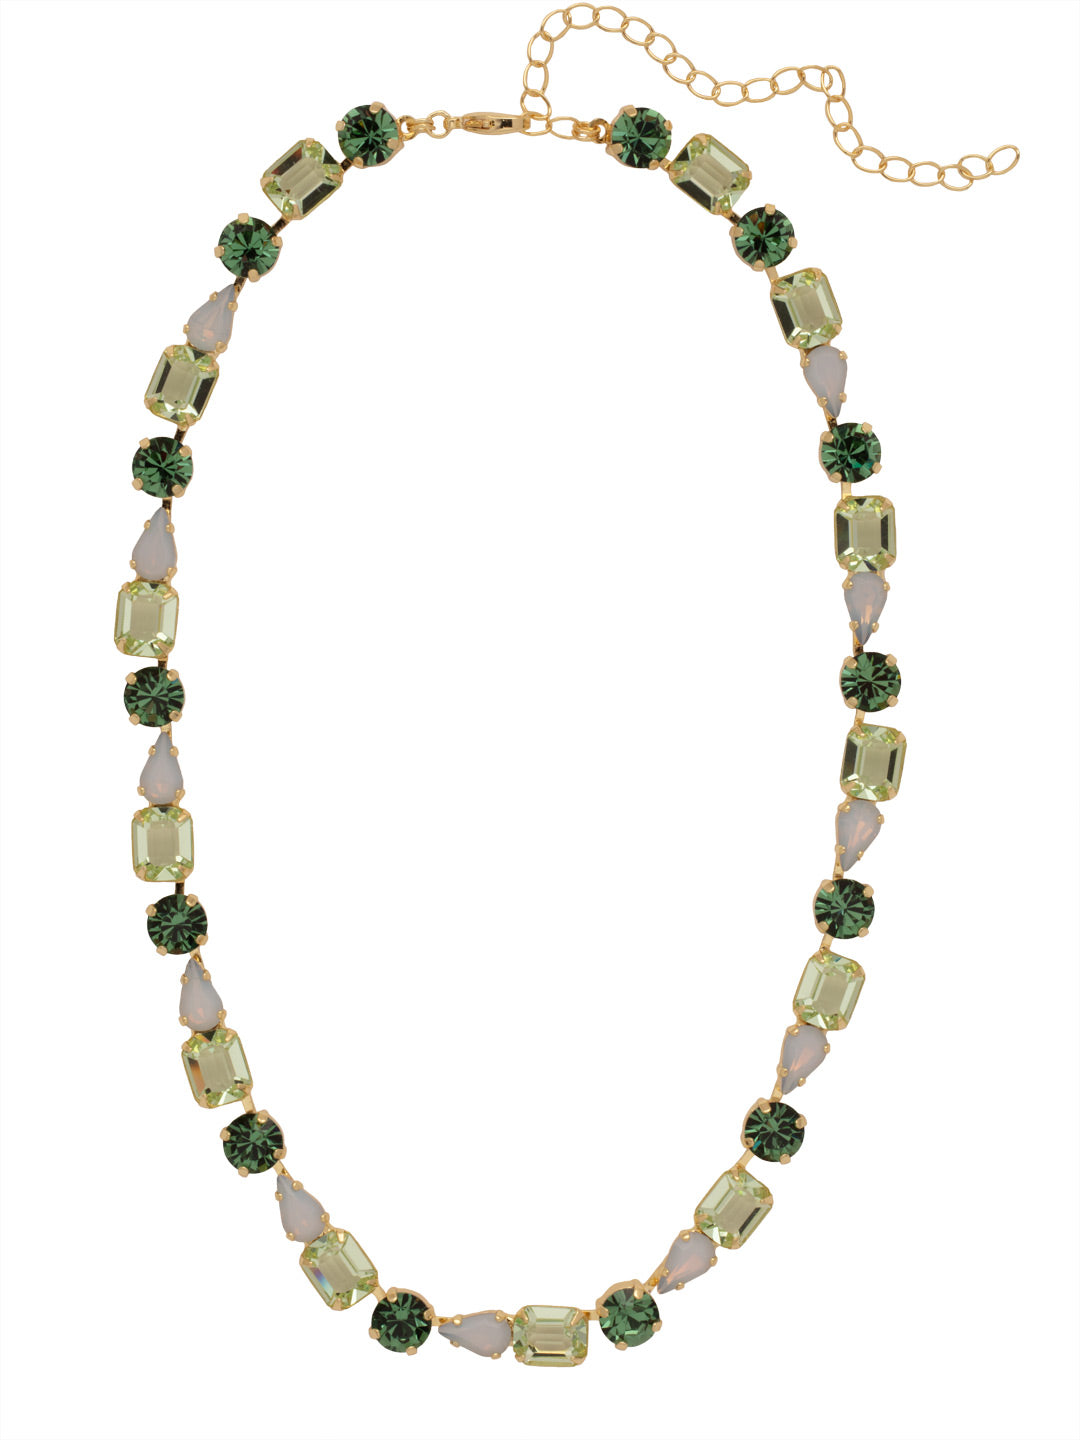 Maude Tennis Necklace - NFF77BGSGR - <p>The Maude Tennis Necklace features a full line of various cuts and colors of crystals on an adjustable chain, secured by a lobster claw clasp. From Sorrelli's Sage Green collection in our Bright Gold-tone finish.</p>